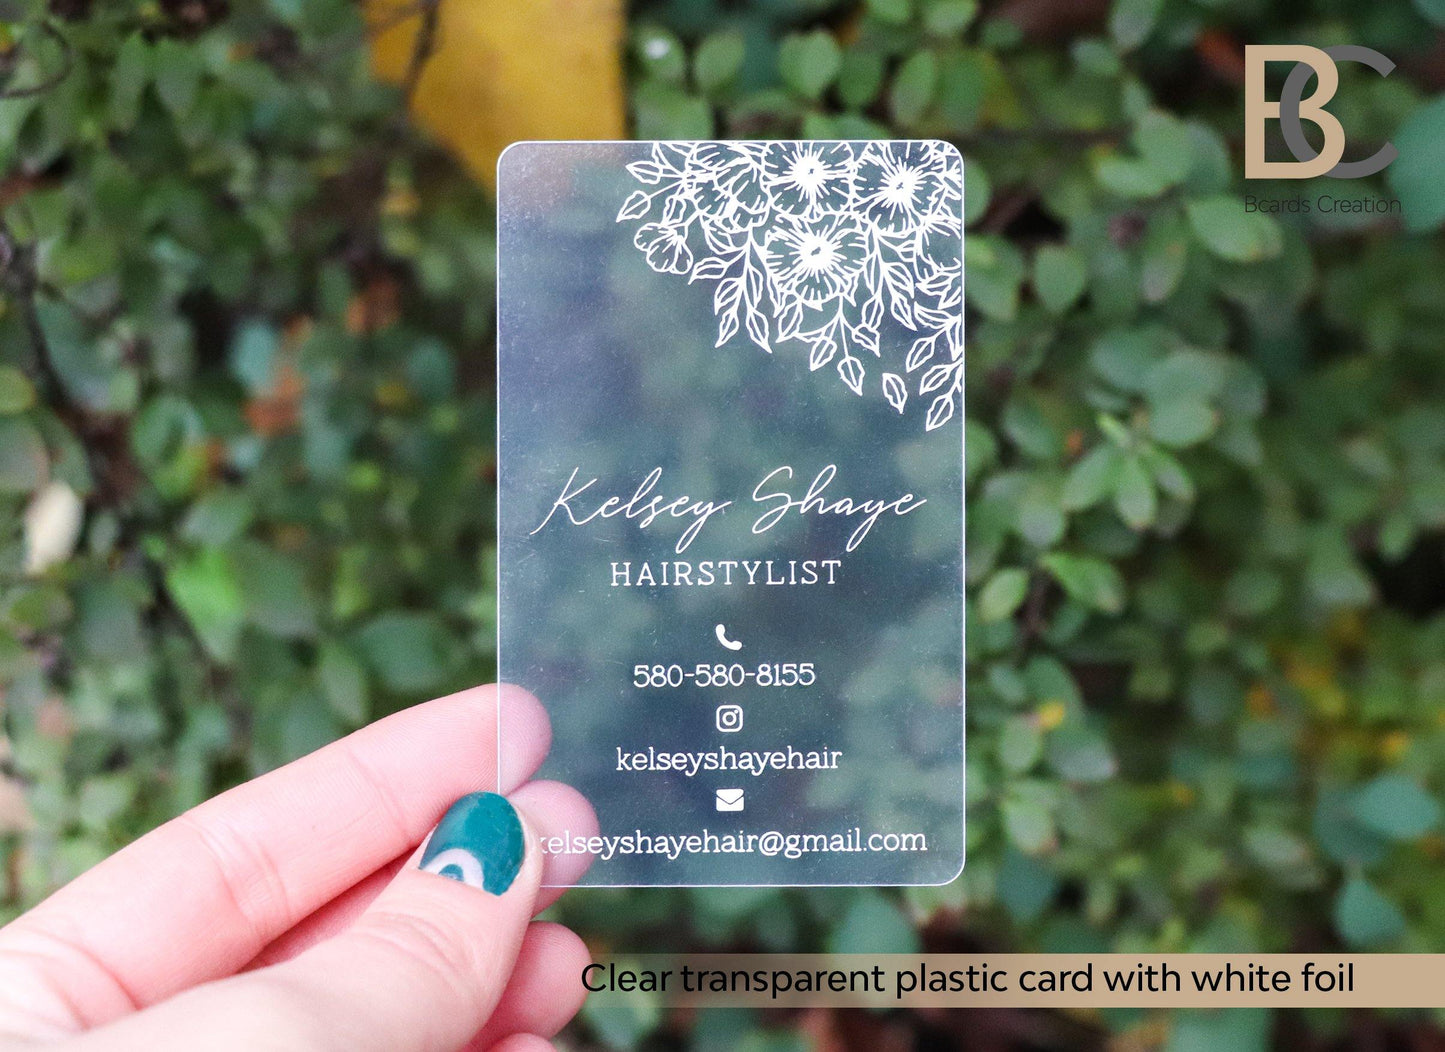 White Printing On Clear plastic | Silkscreen Printed | Frosted Business Cards - BcardsCreation